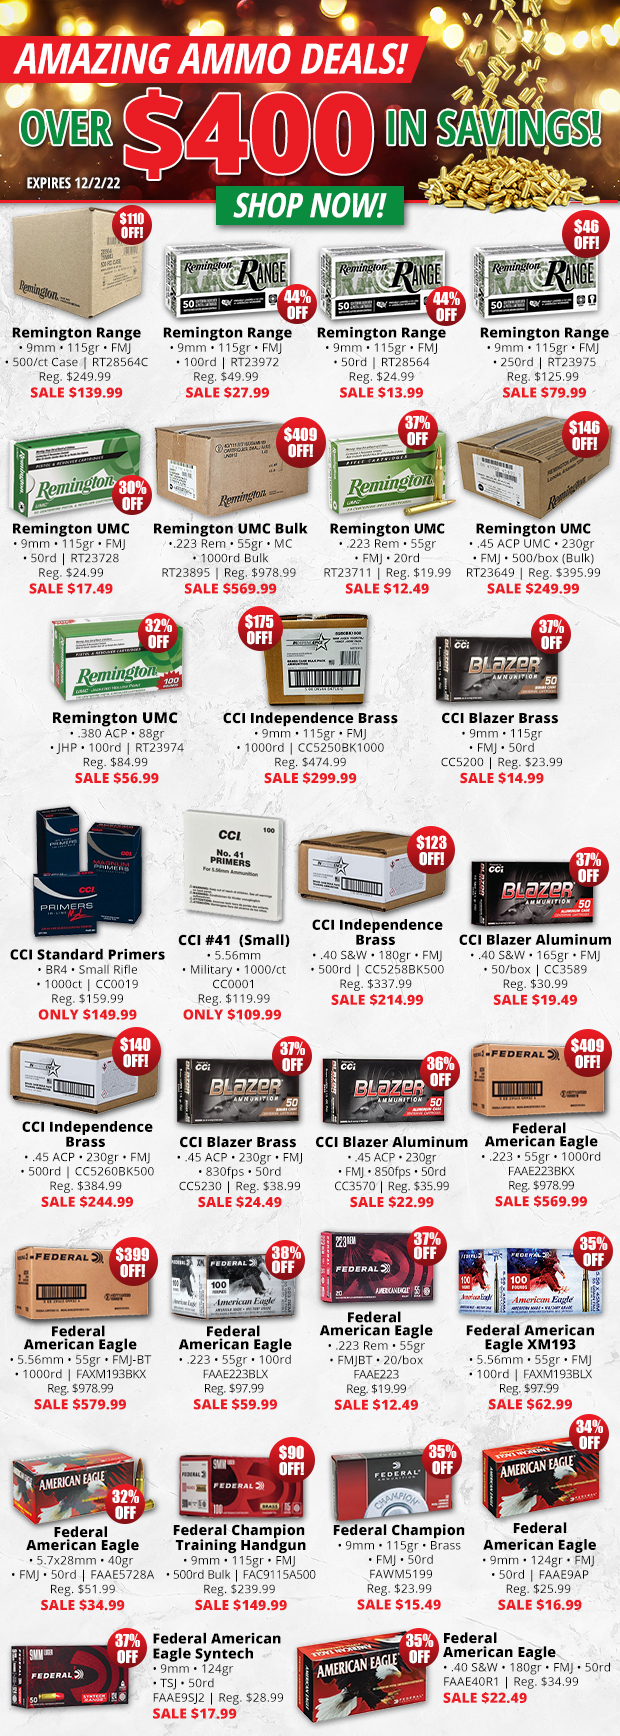 Over $400 in Savings on Ammo!